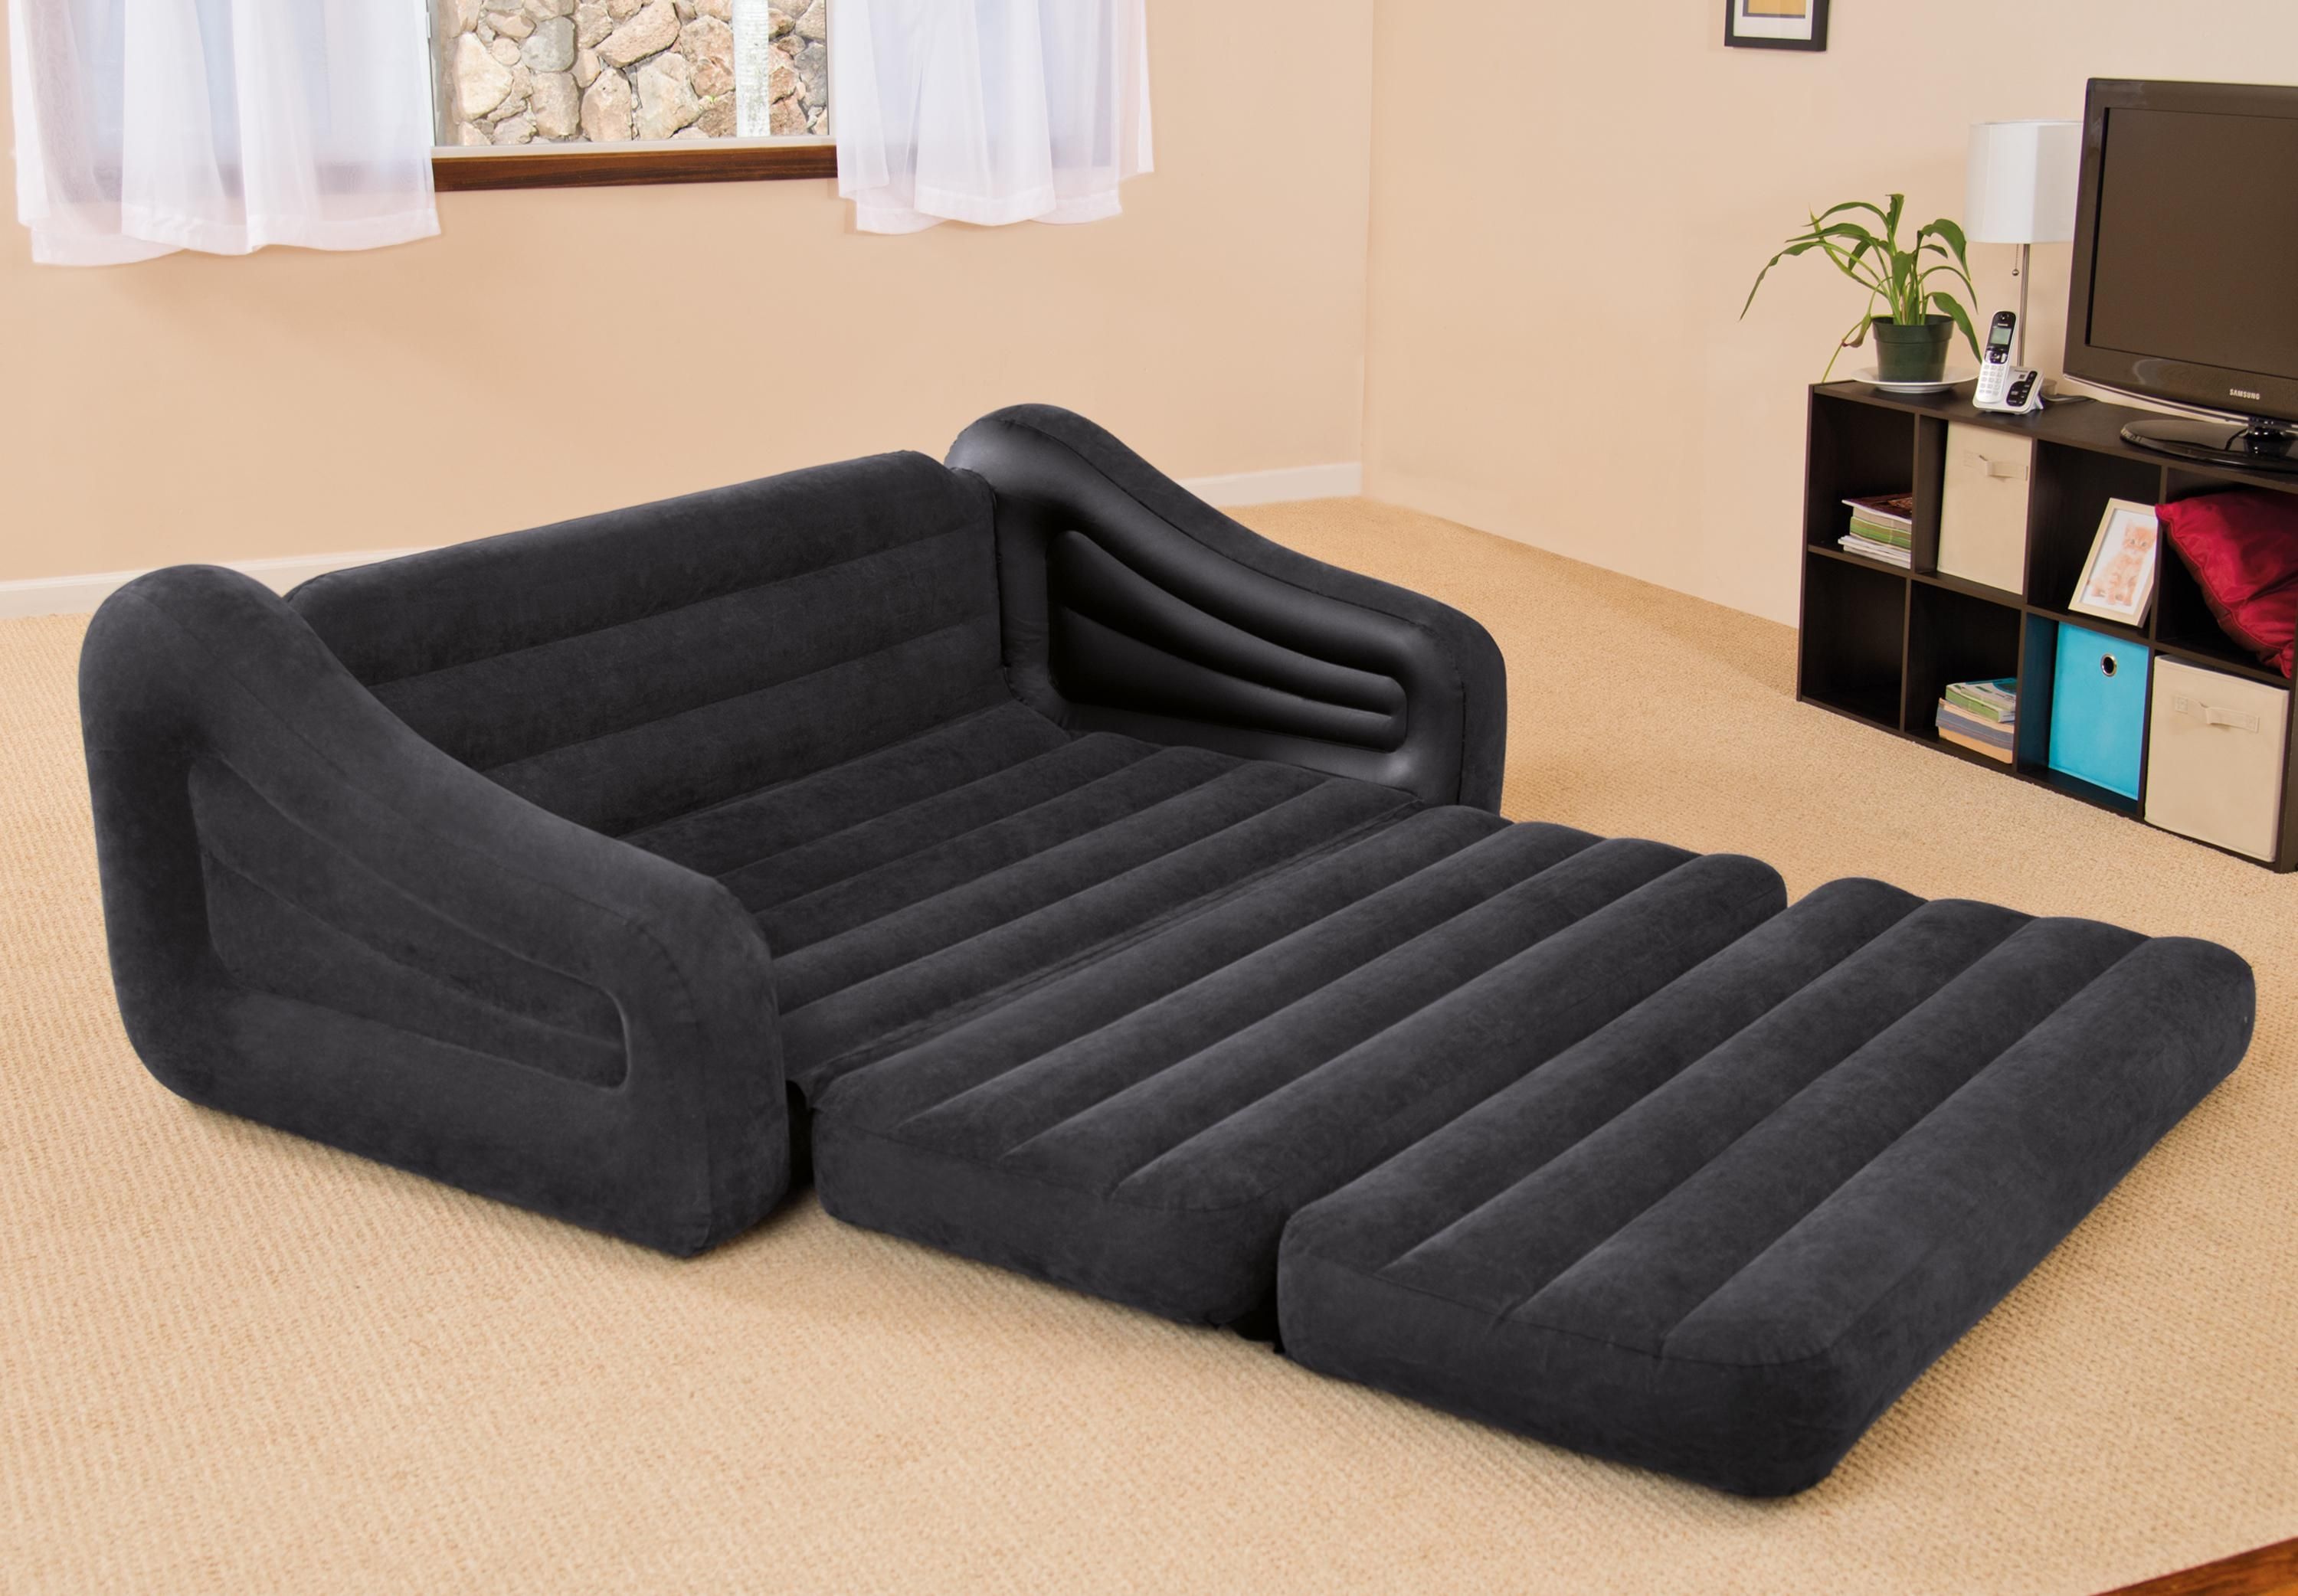 Intex Inflatable Pull Out Sofa & Queen Bed Mattress Sleeper W/ Ac In Intex Inflatable Sofas (View 10 of 20)